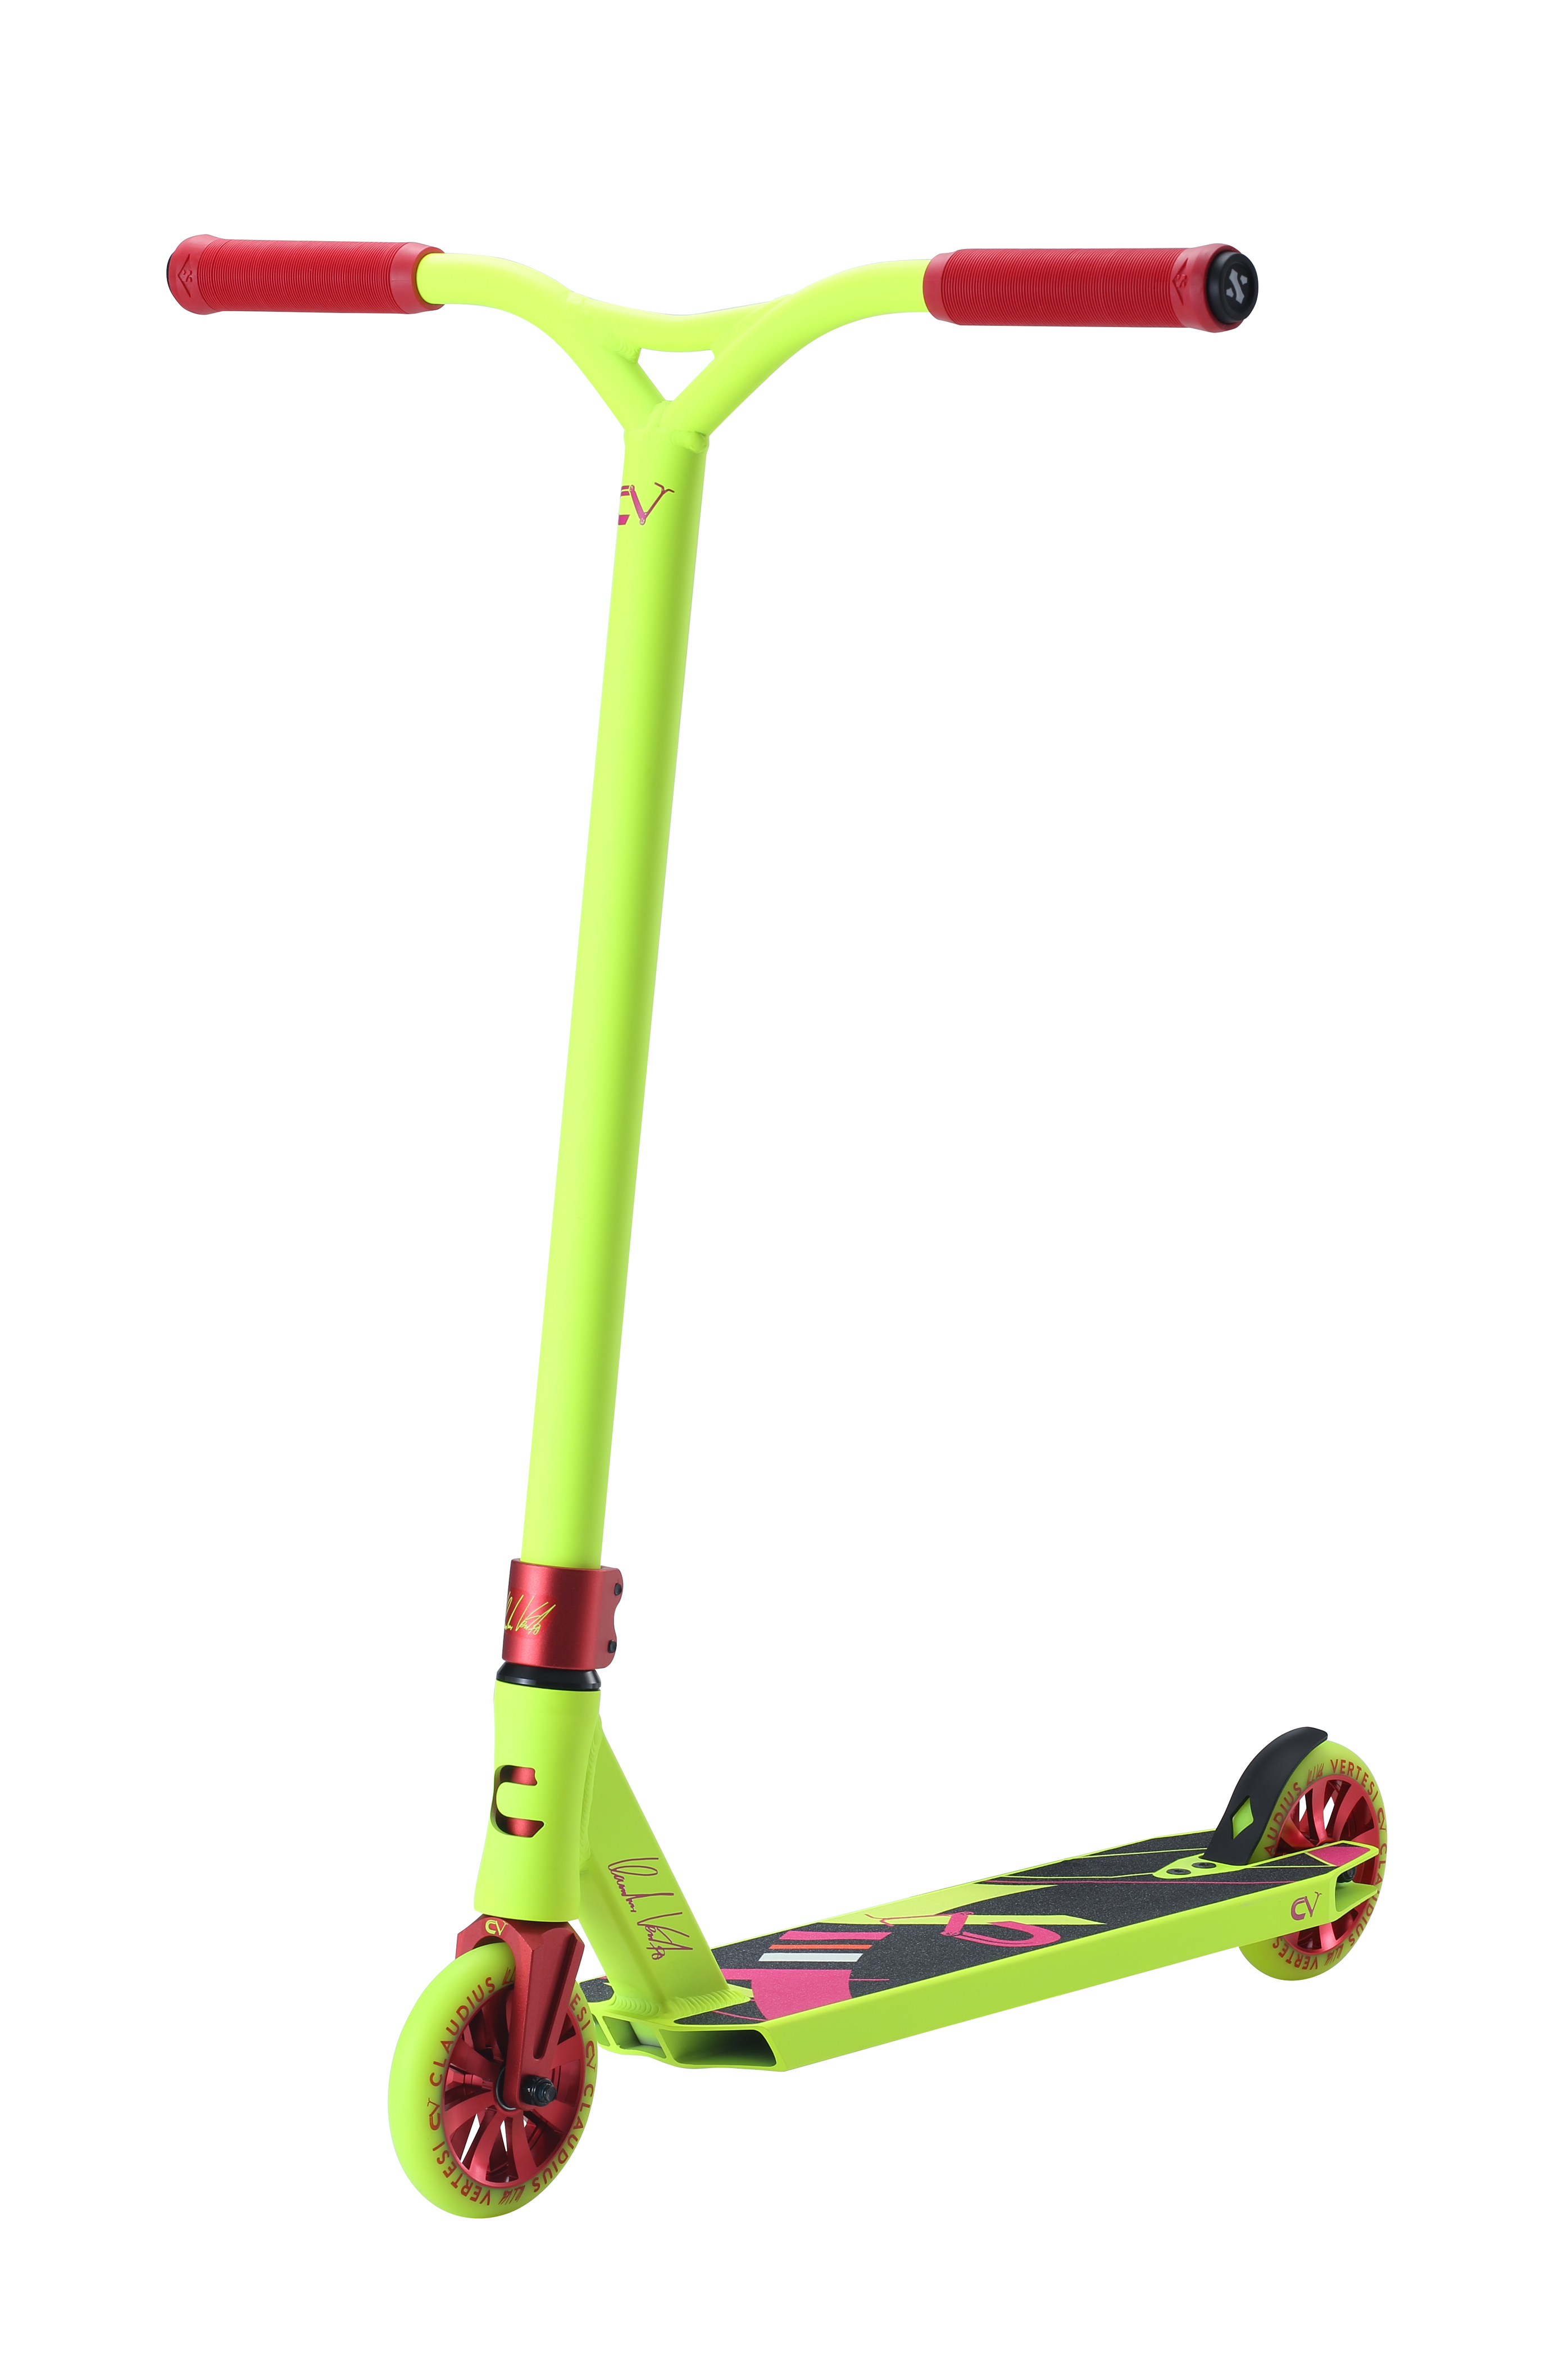 CV Complete Scooter Yellow - Sacrifice Scooters